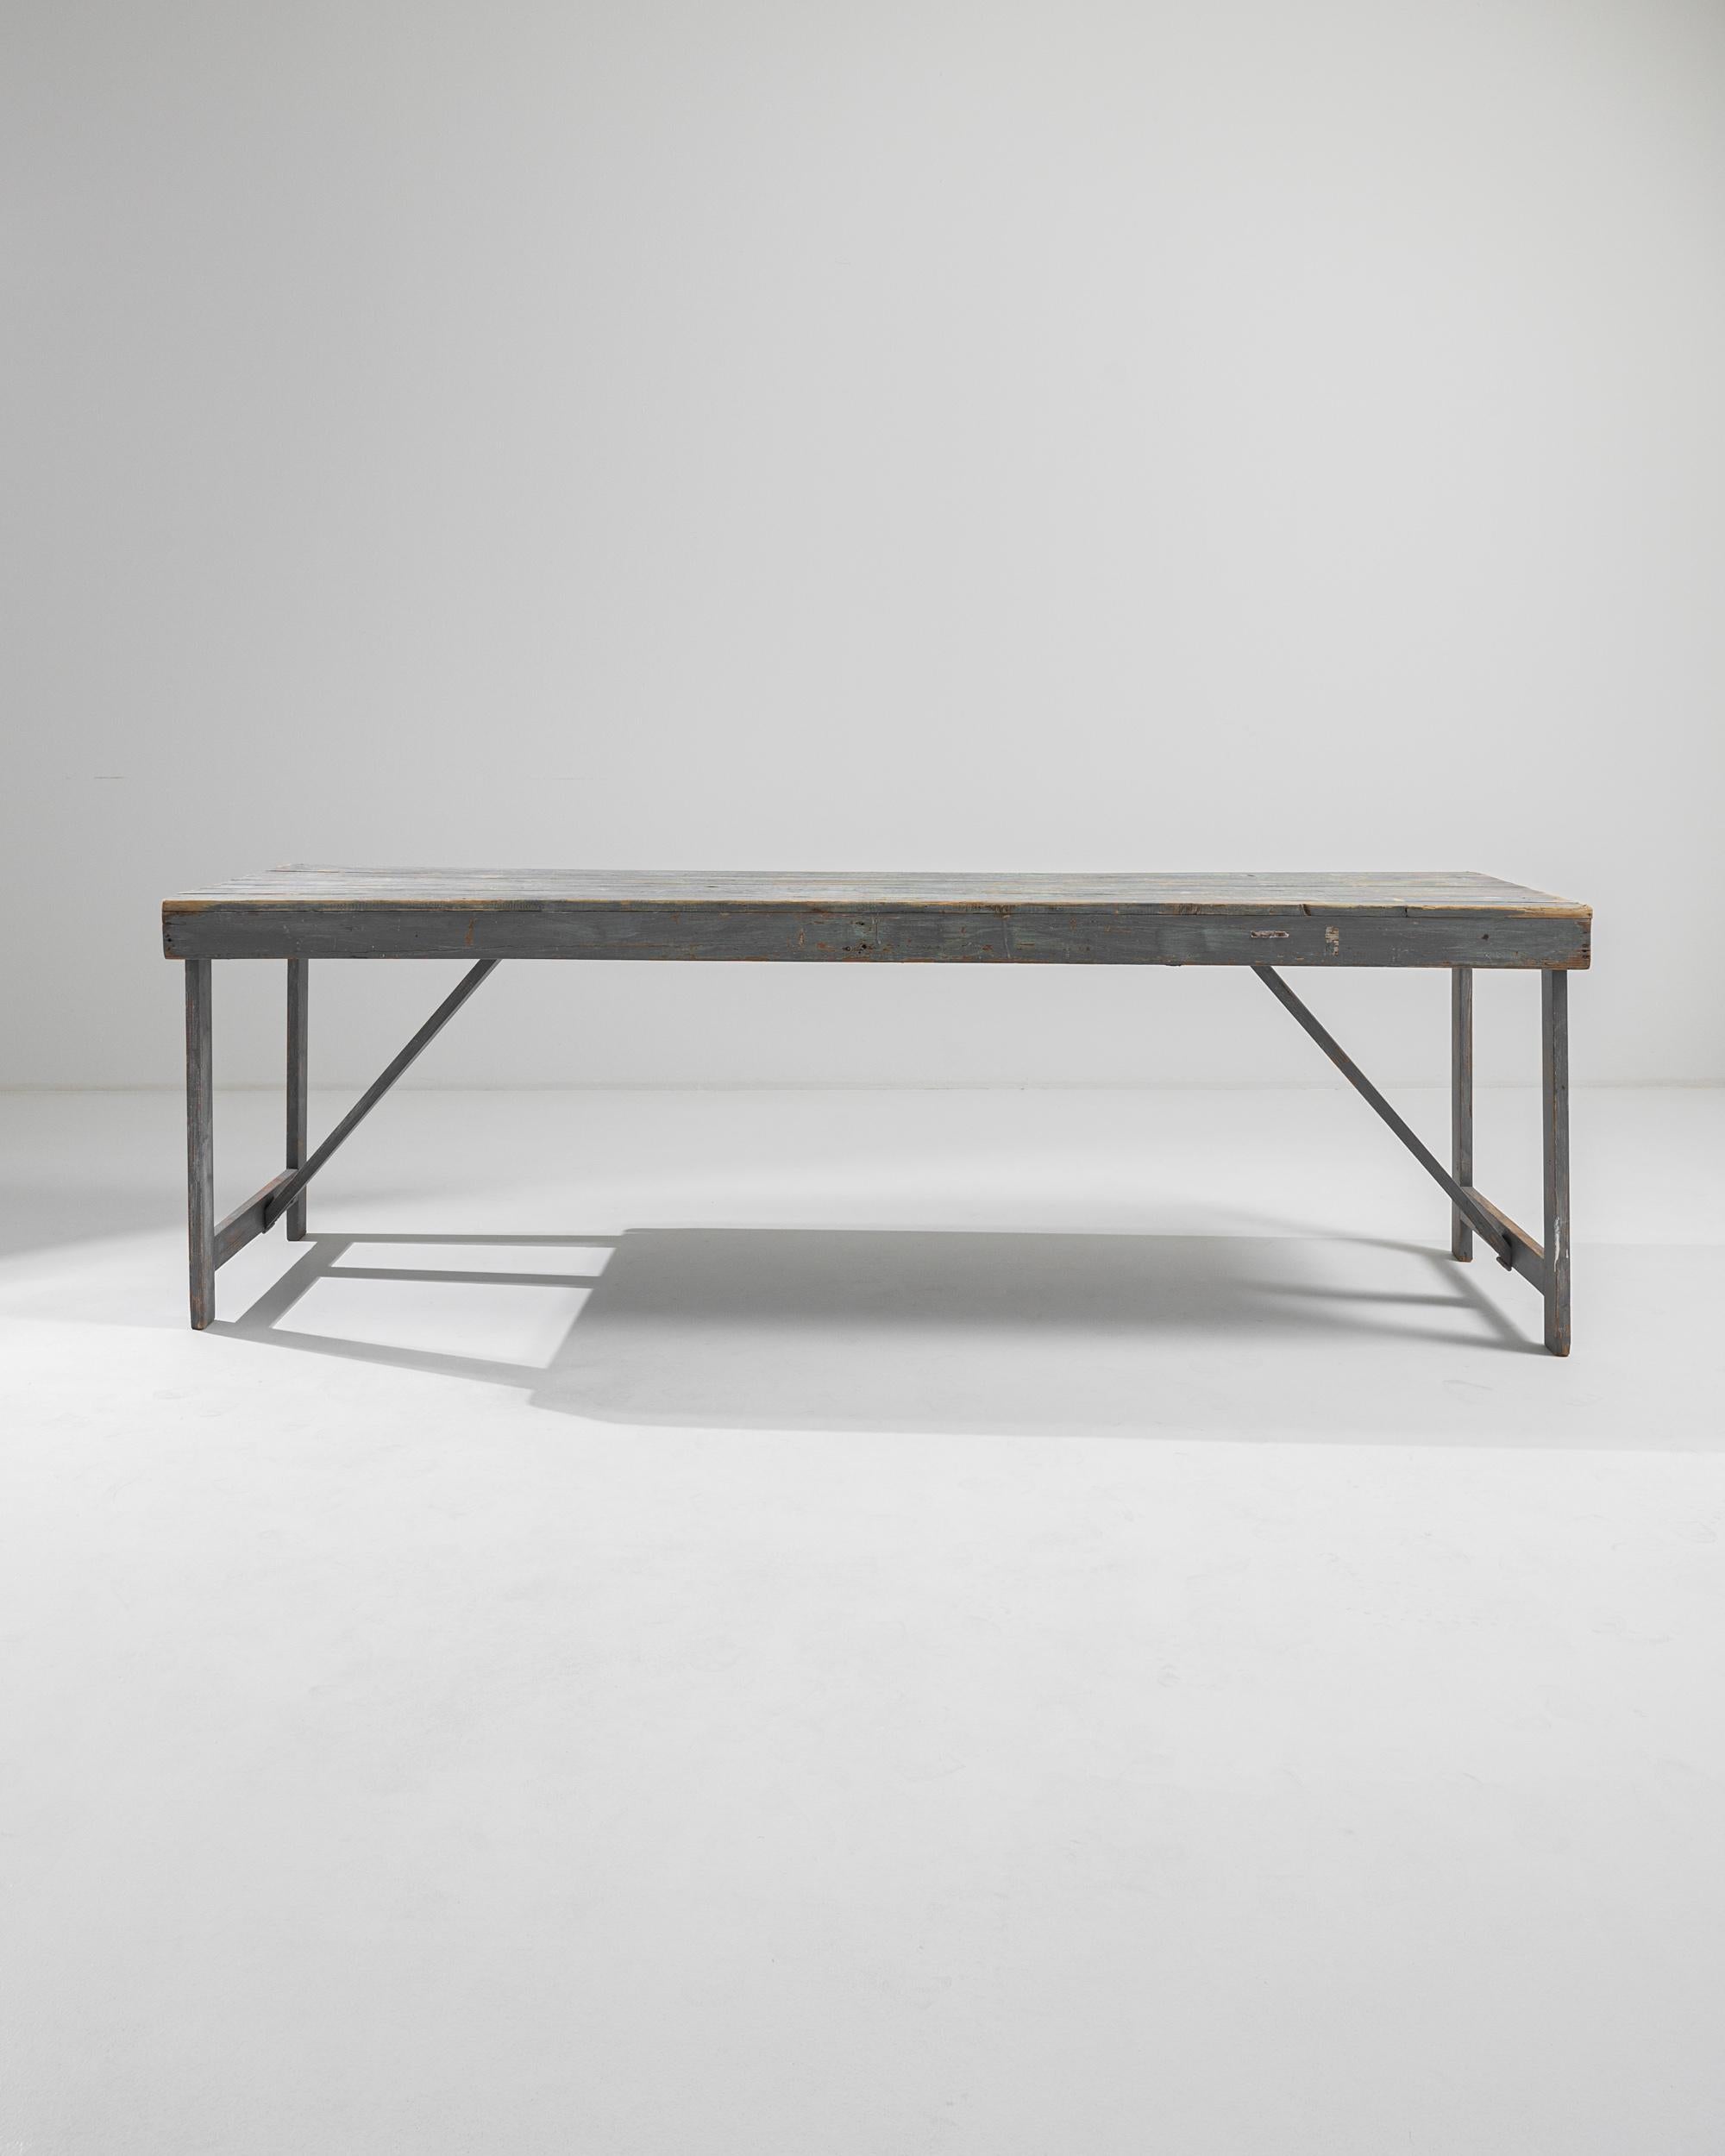 Straightforward and sincere, this vintage wooden table has a rustic pragmatism. Made in Belgium in the 20th century, a tabletop of wooden boards sits atop a simple frame; slanting struts provide an angular counterpoint to the rectilinear form. The